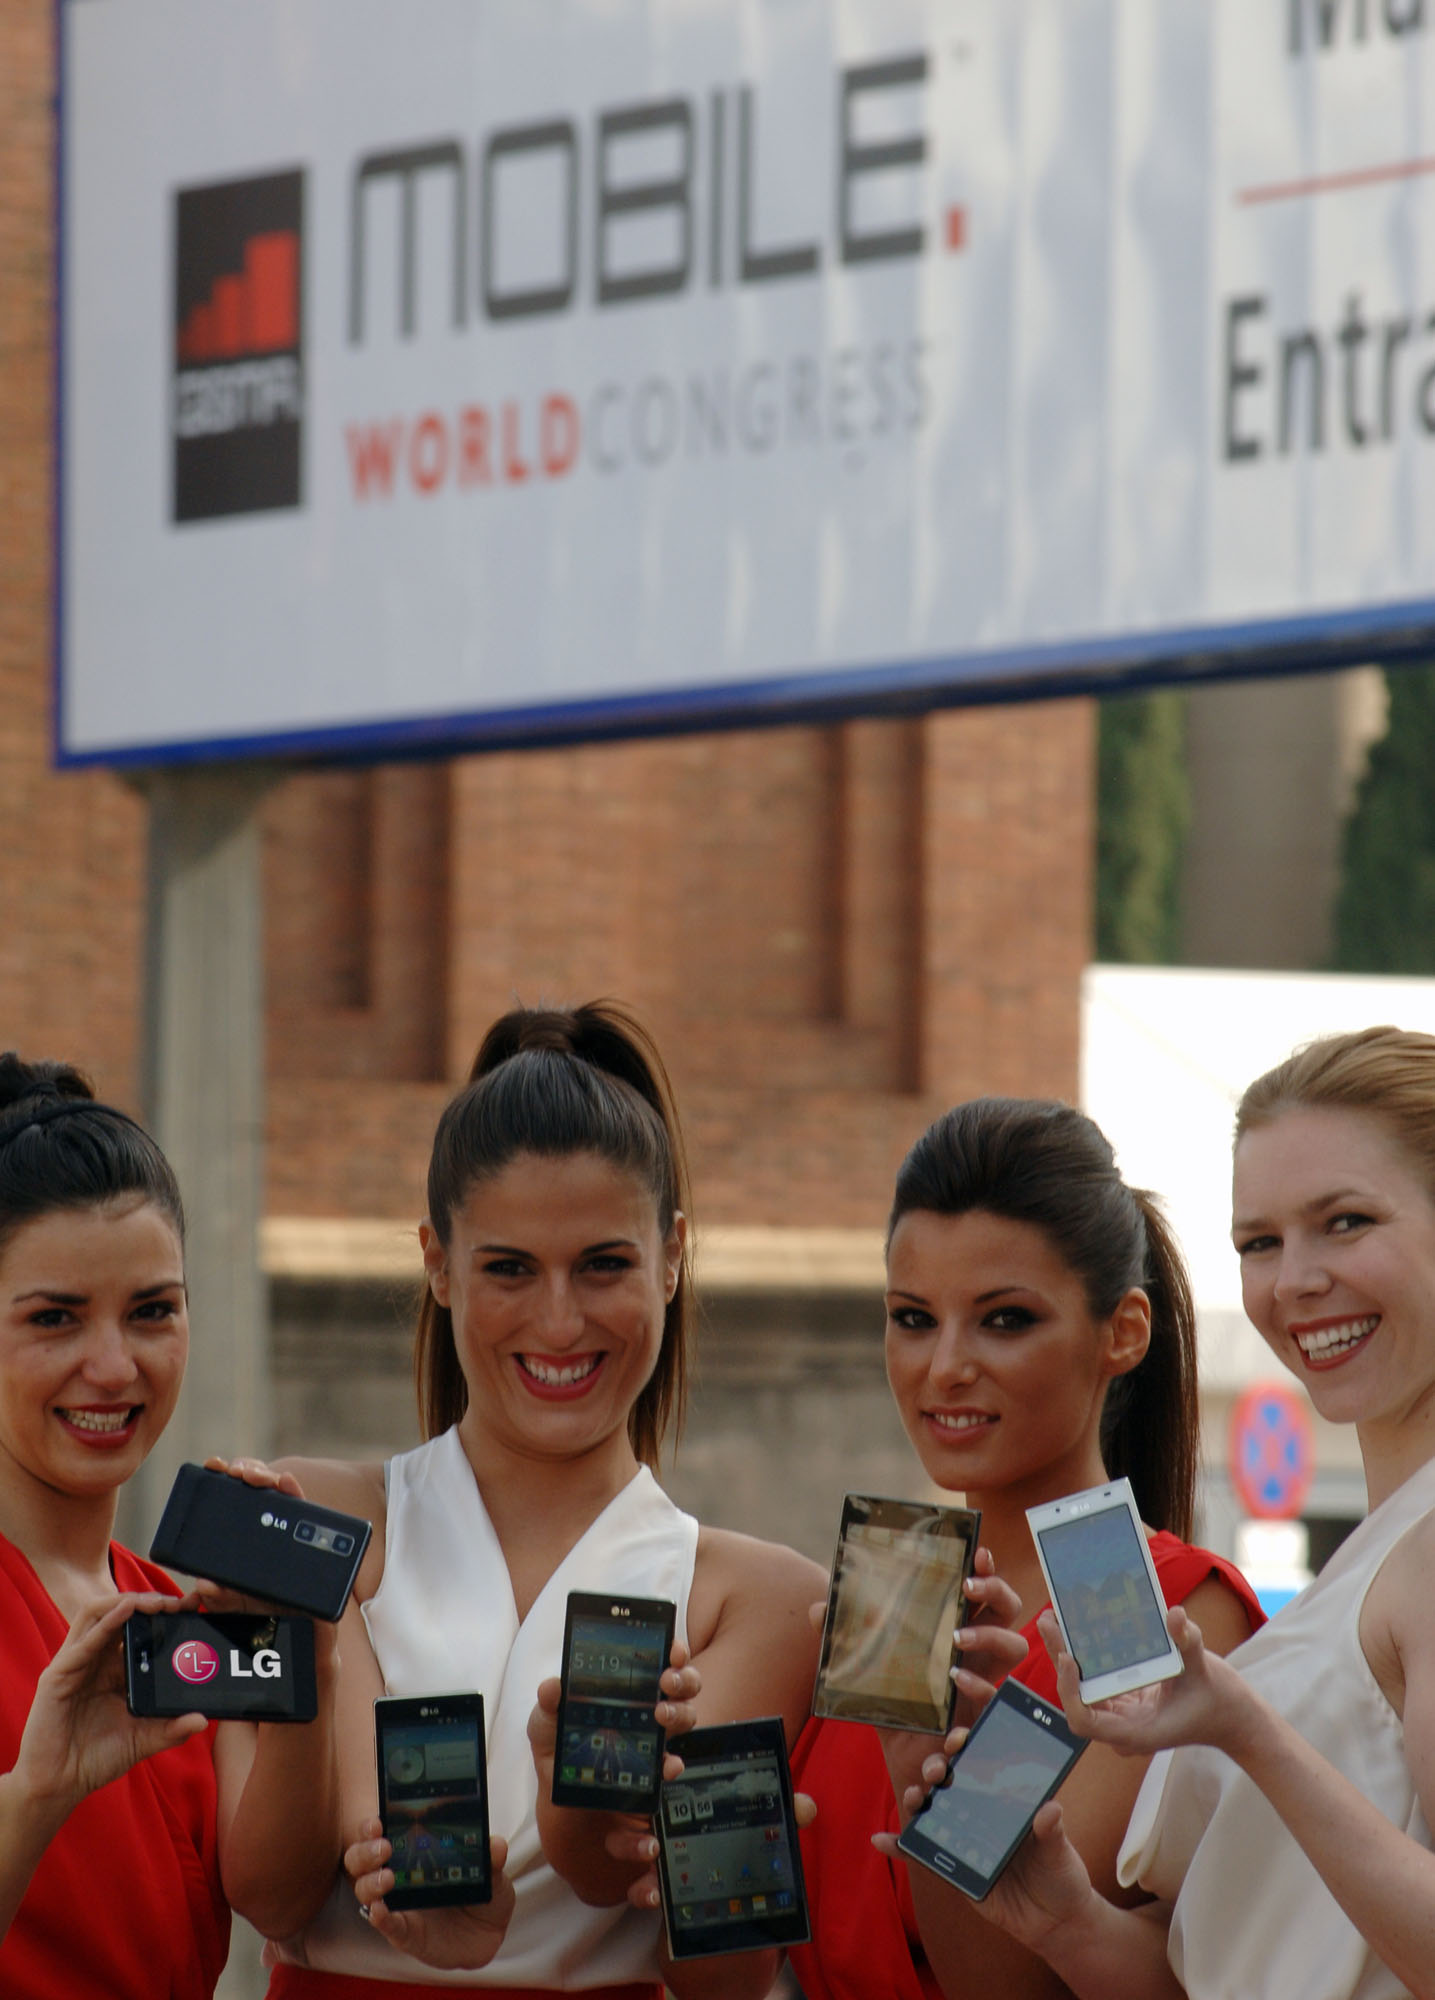 4 female models hold LG Optimus Vu:, LG Optimus 4X HD, LG Optimus 3D Max and LG Optimus L7 and show its front and rear views in front of the main entrance of Fira de Barcelona, Montjuïc venue